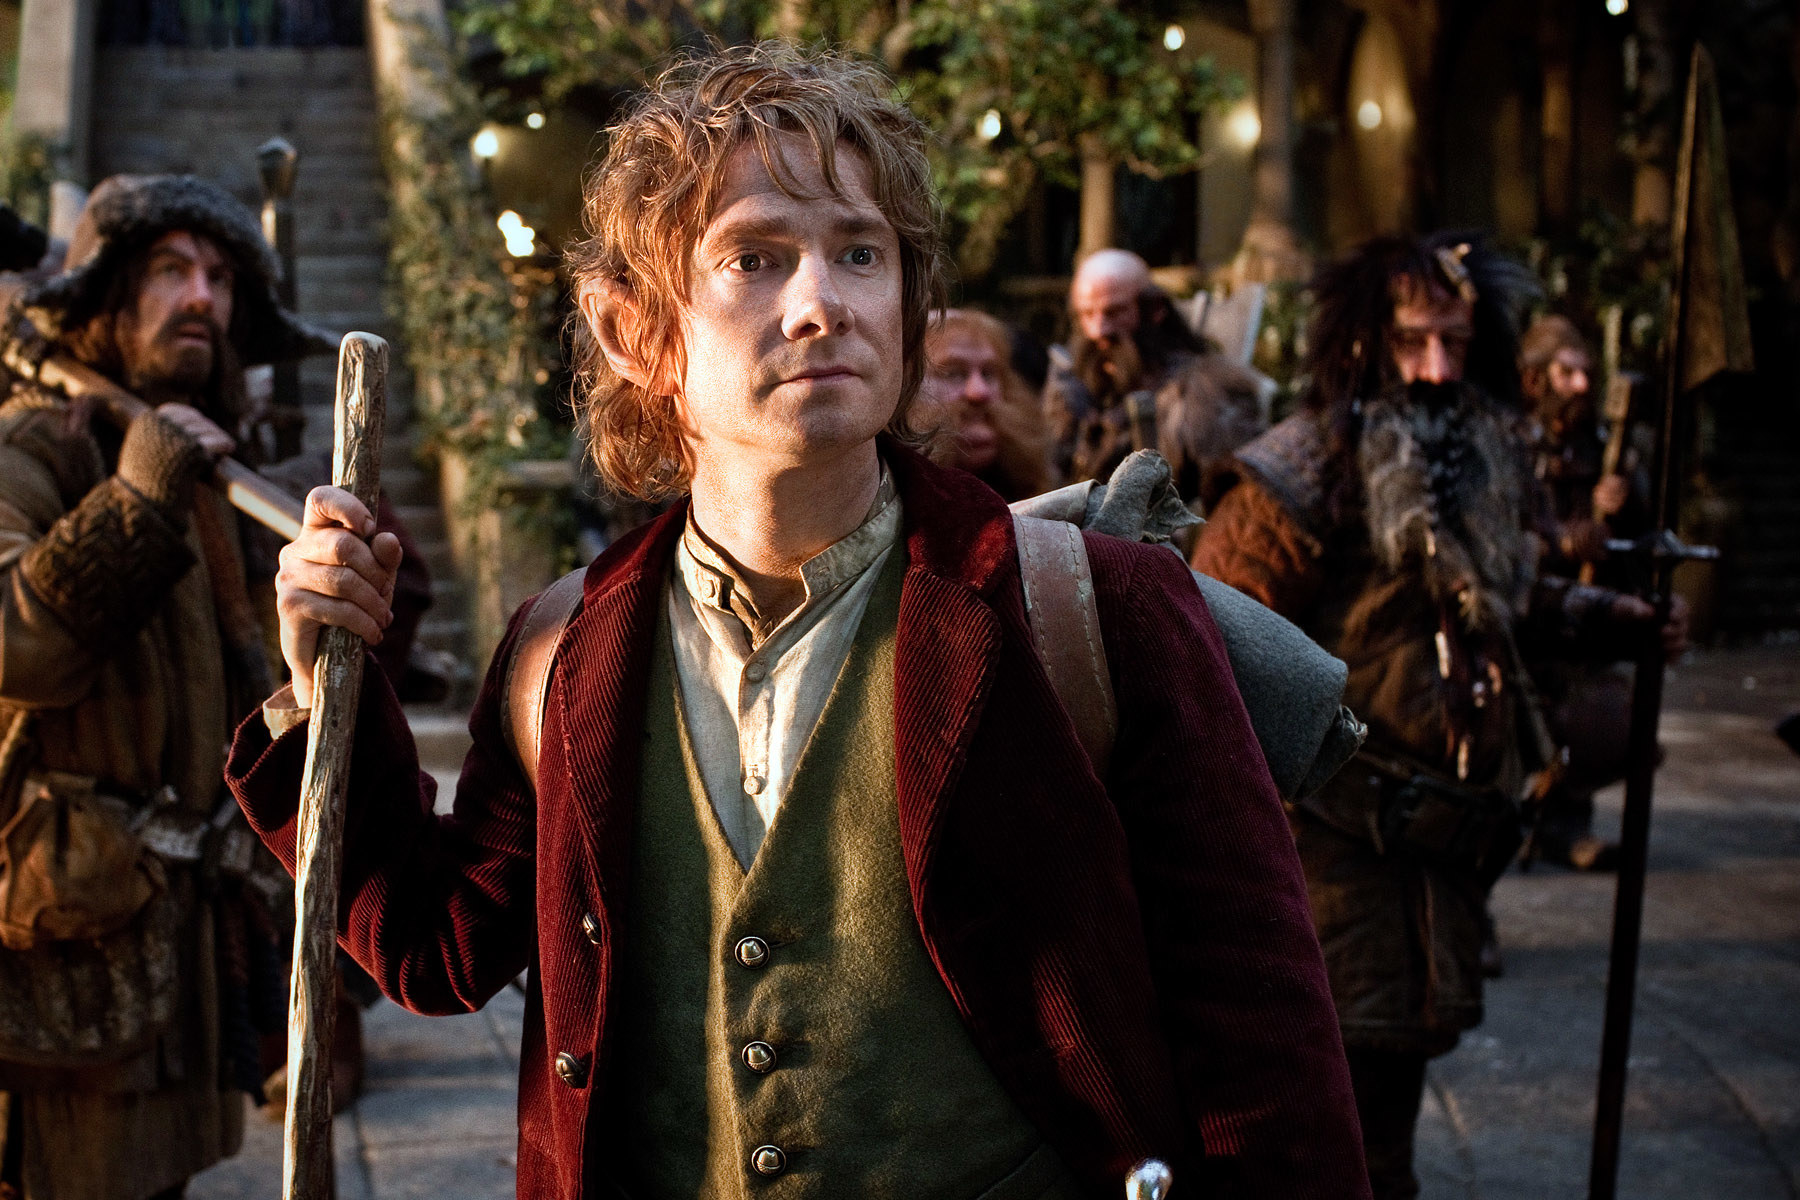 Martin Freeman in The Hobbit: An Unexpected Journey with elongated ears